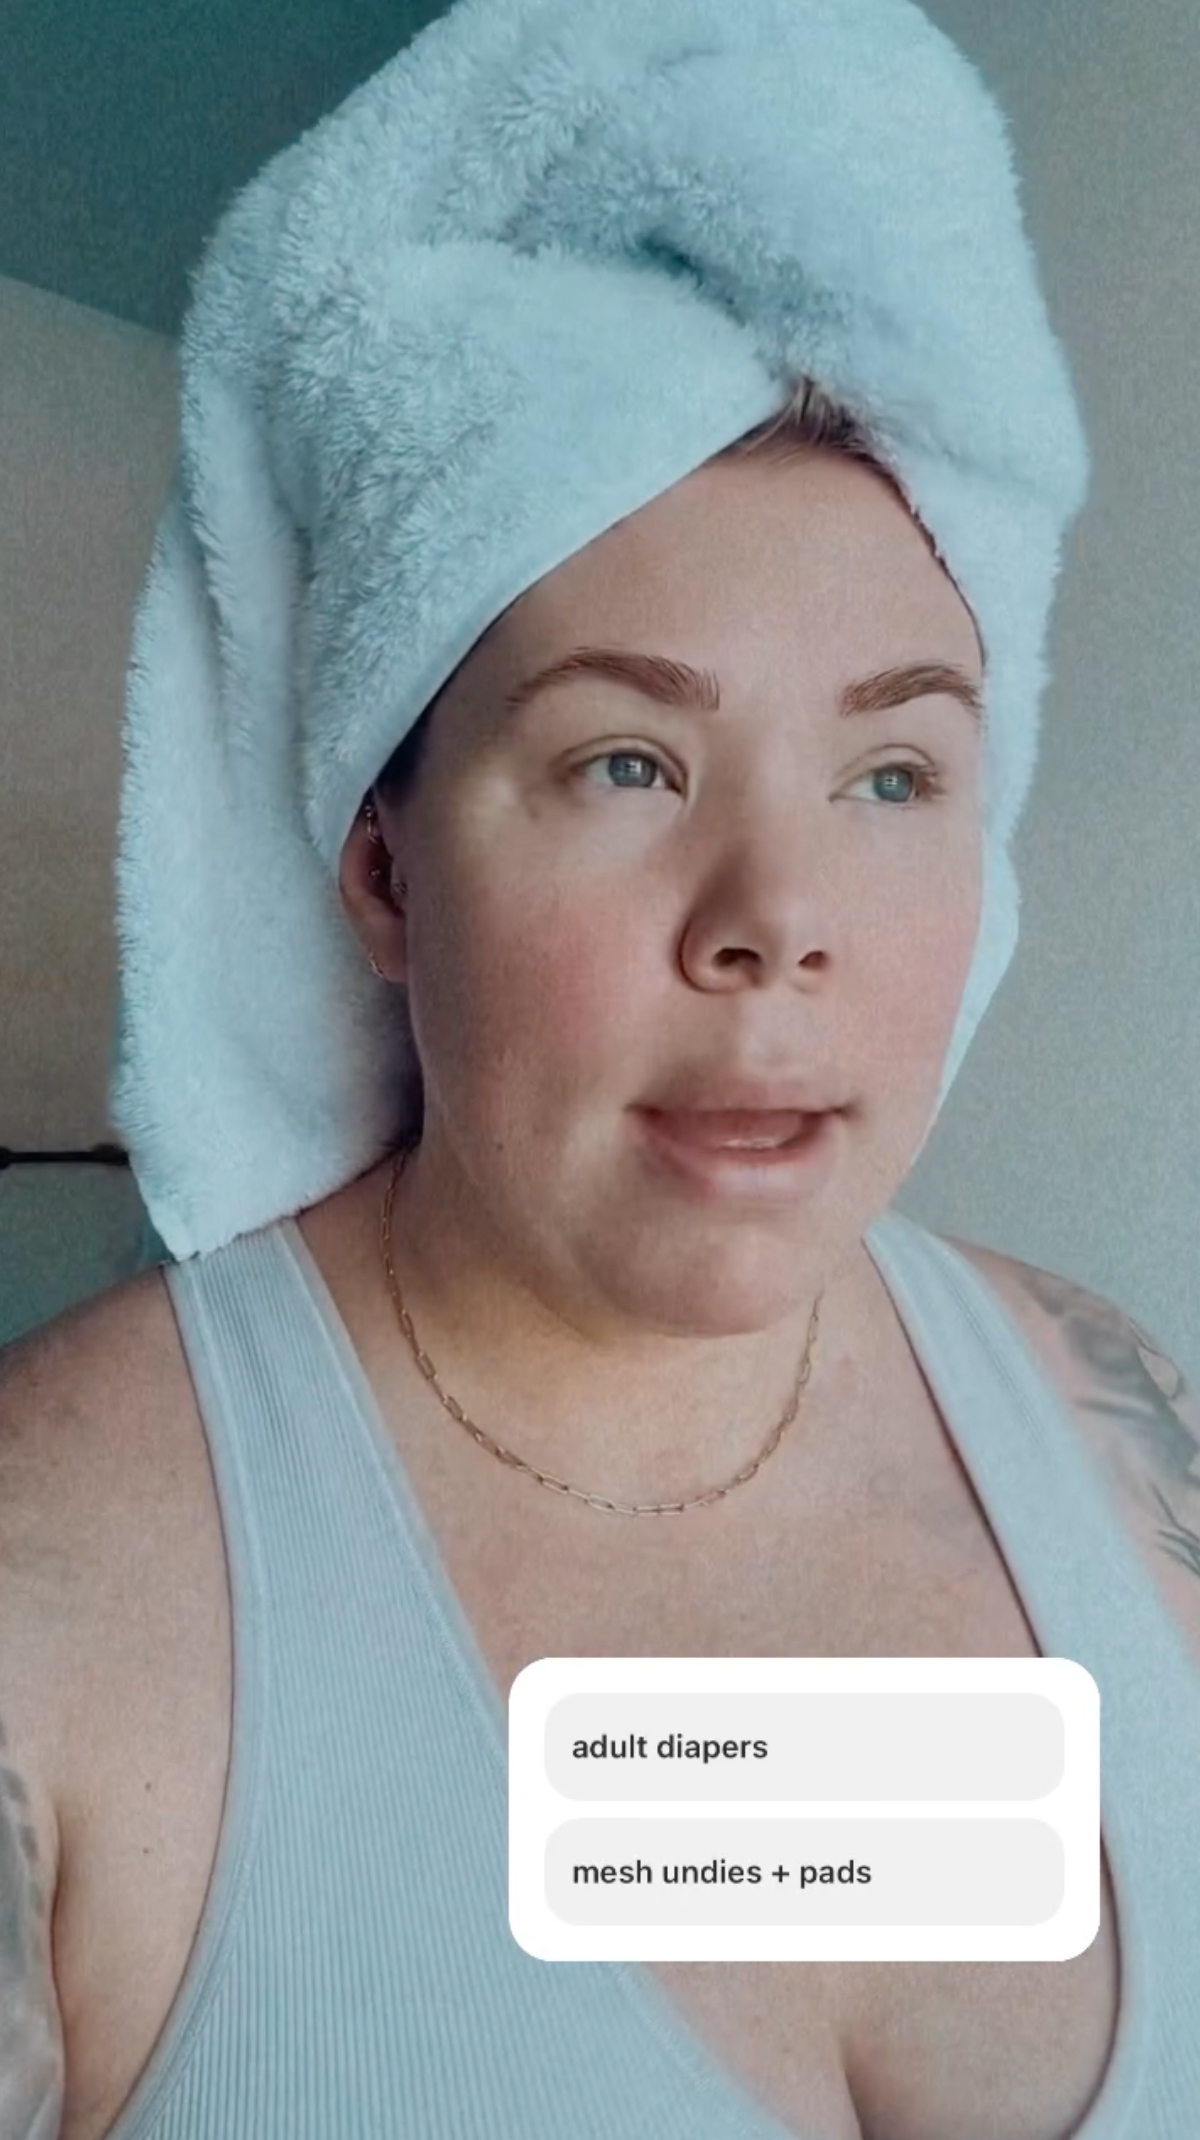 Kailyn confirming that she wore adult diapers wasn't the only thing she recently admitted